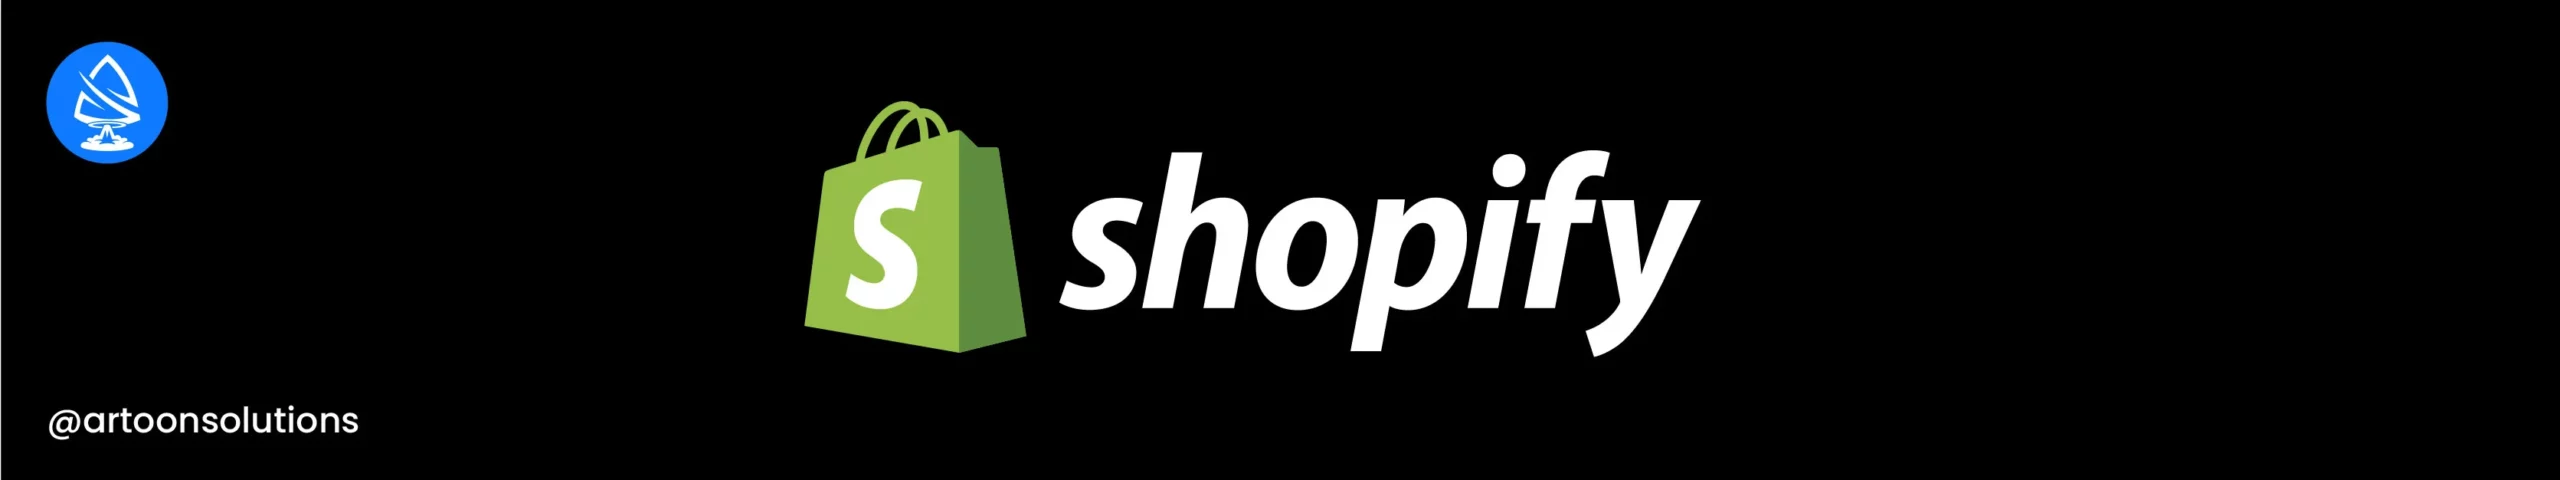 Shopify: Your Ecommerce Online Store Builder